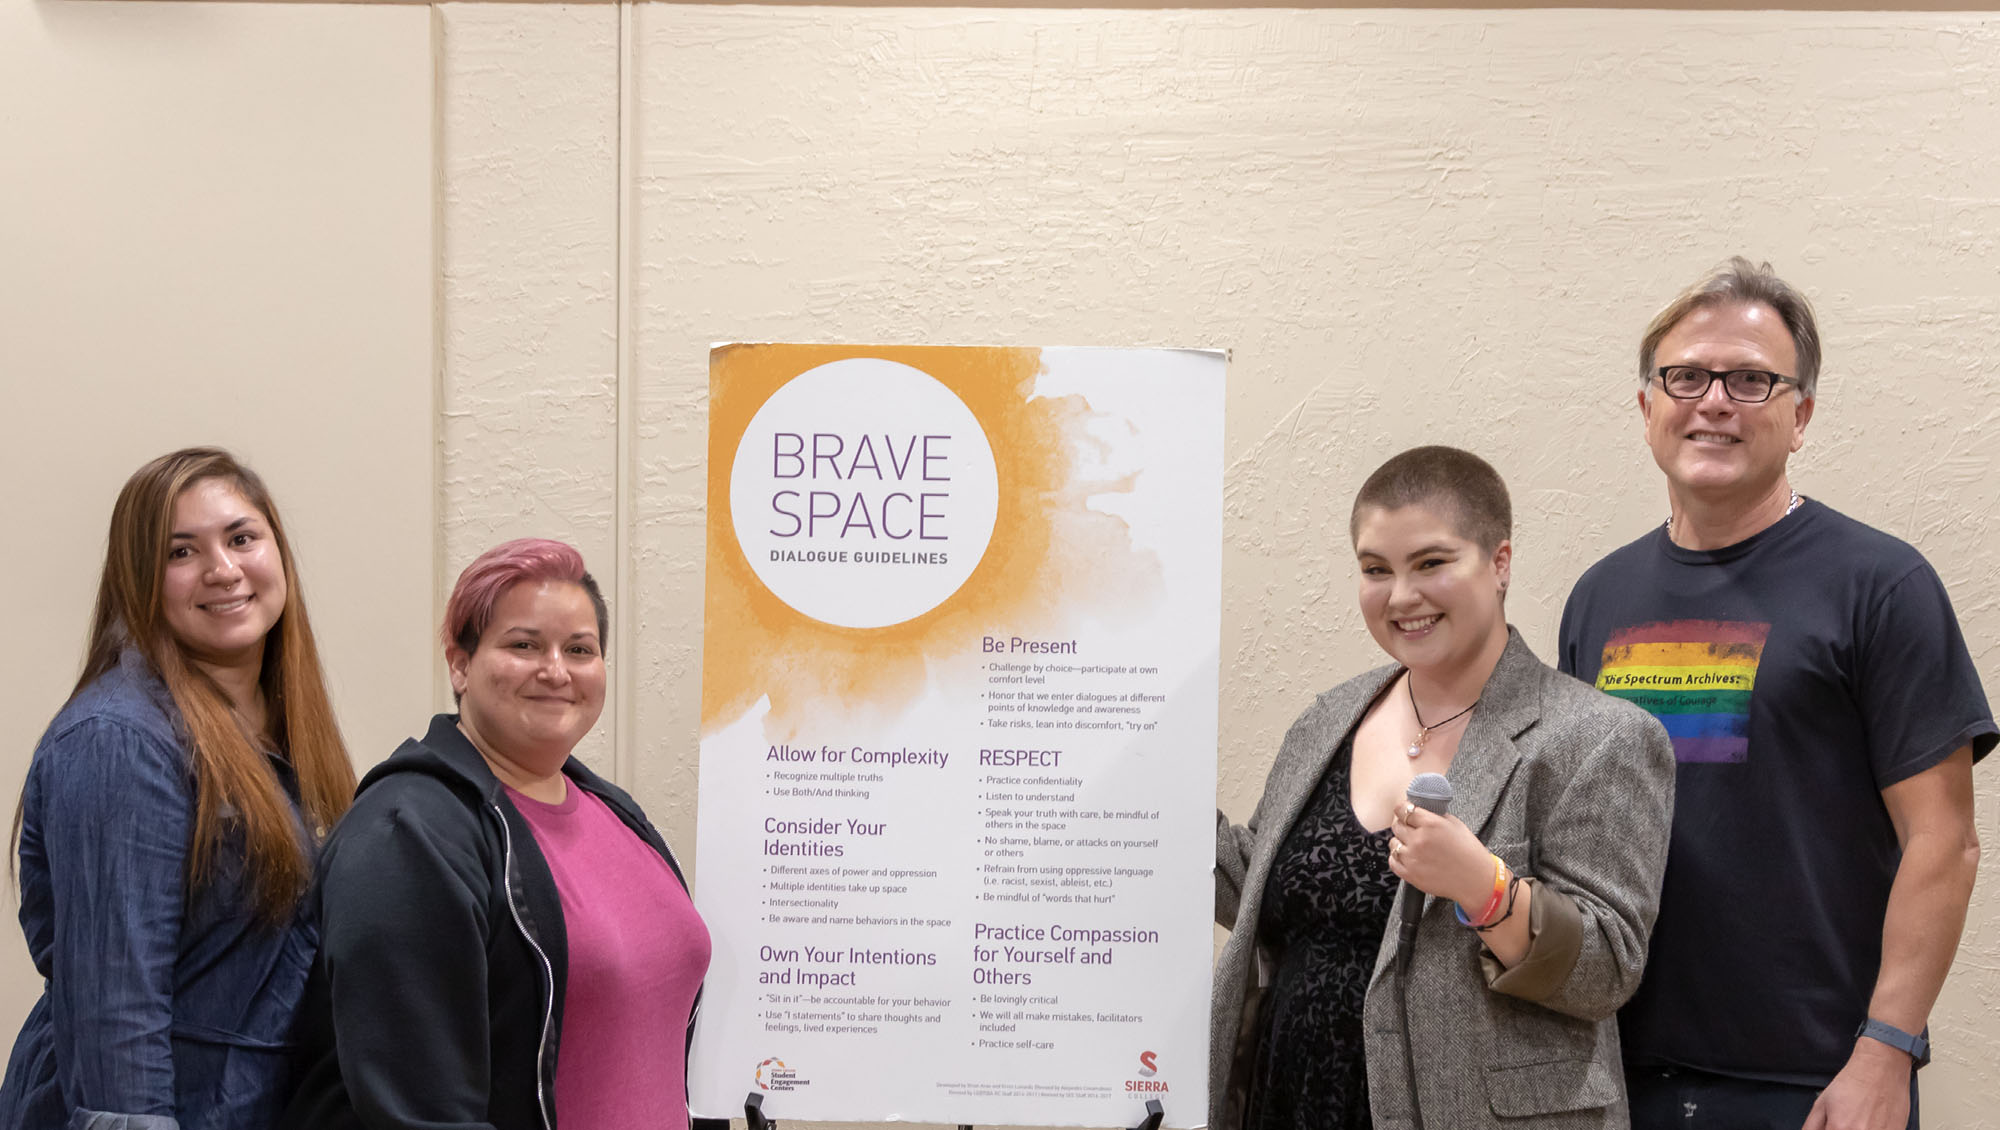 Brave Space event at Sierra College